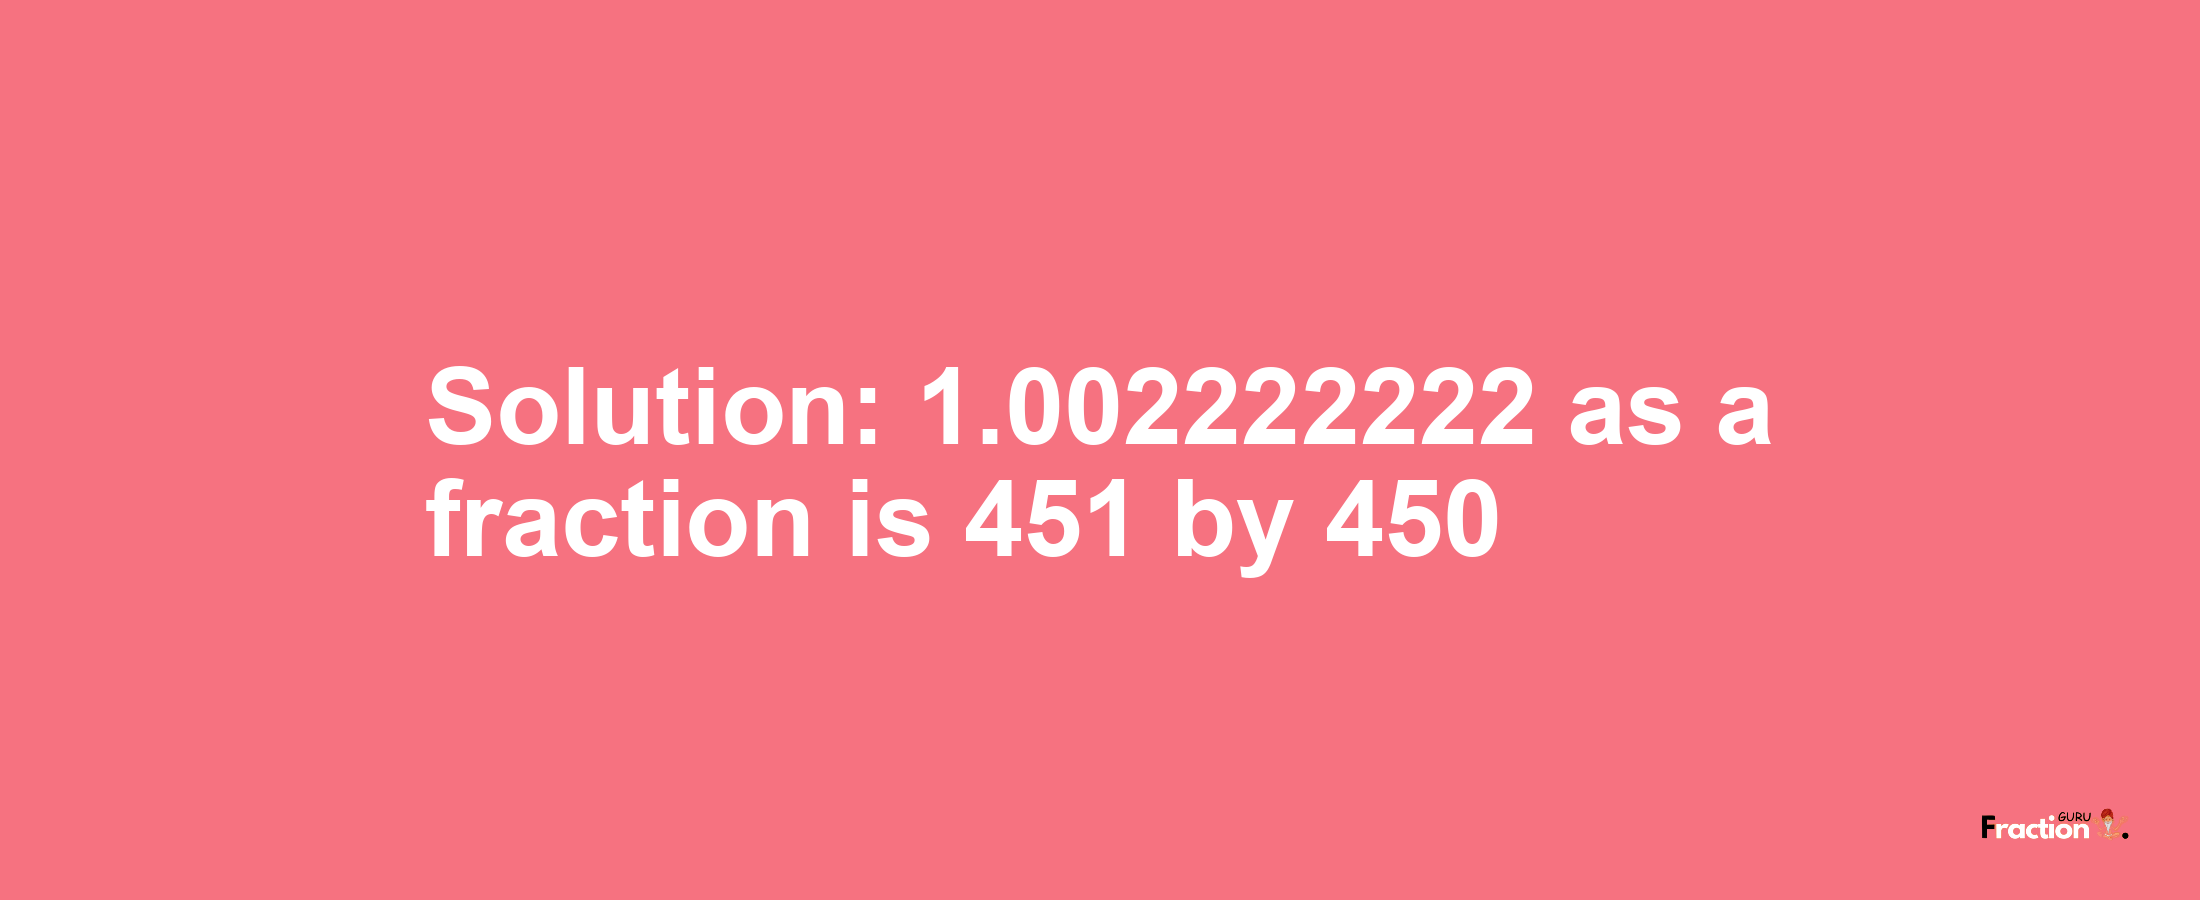 Solution:1.002222222 as a fraction is 451/450